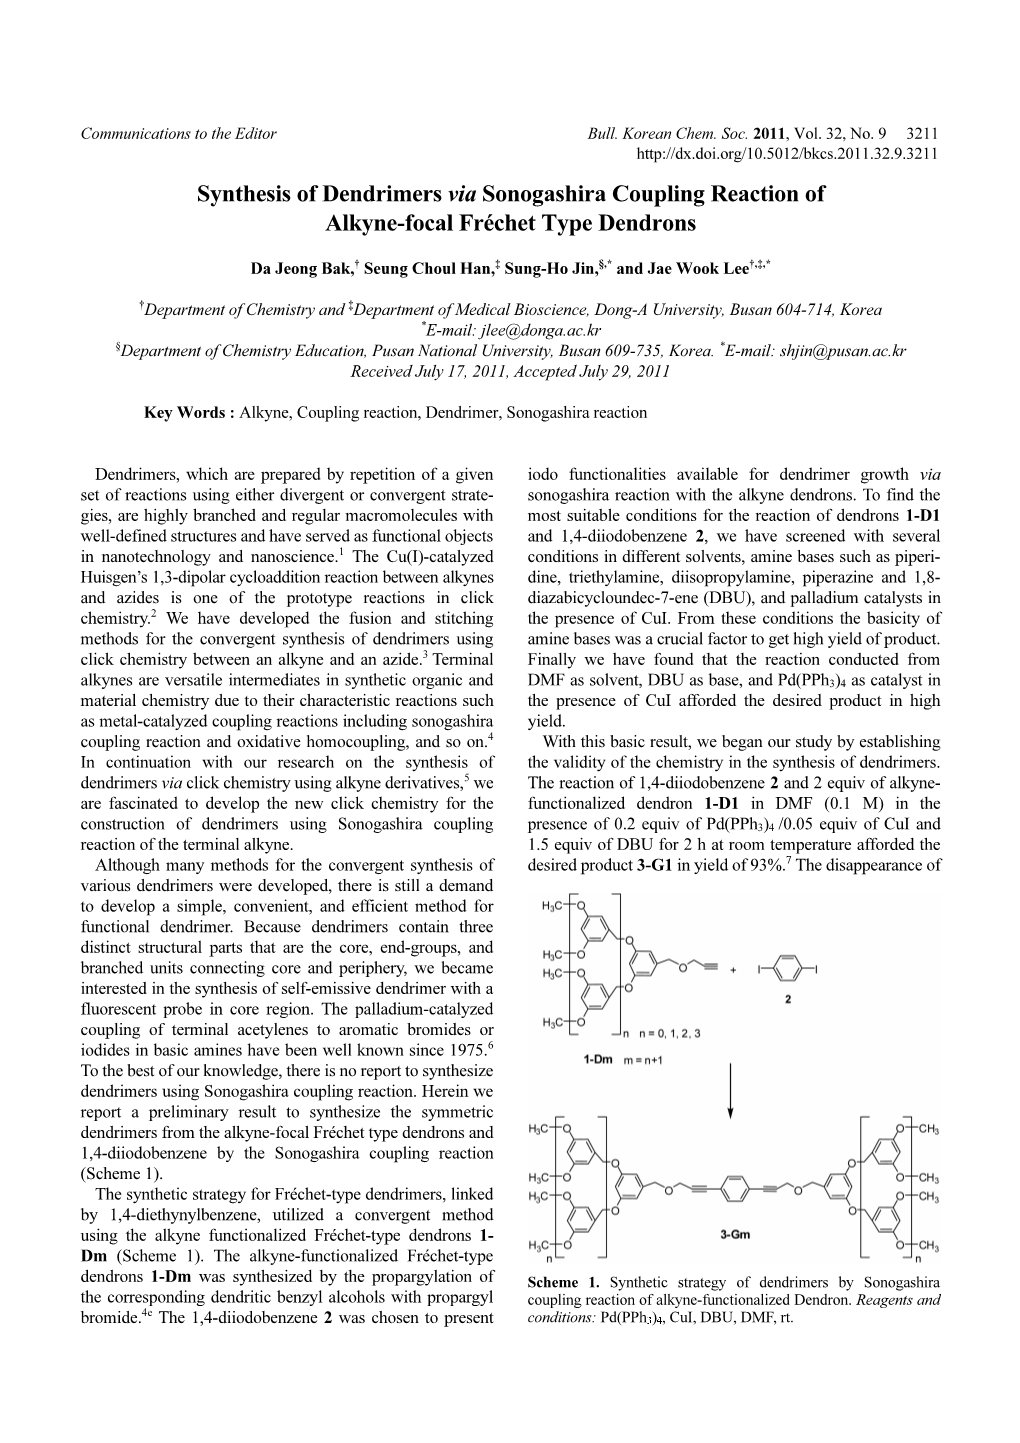 Synthesis of Dendrimers Via Sonogashira Coupling Reaction of Alkyne-Focal Fréchet Type Dendrons